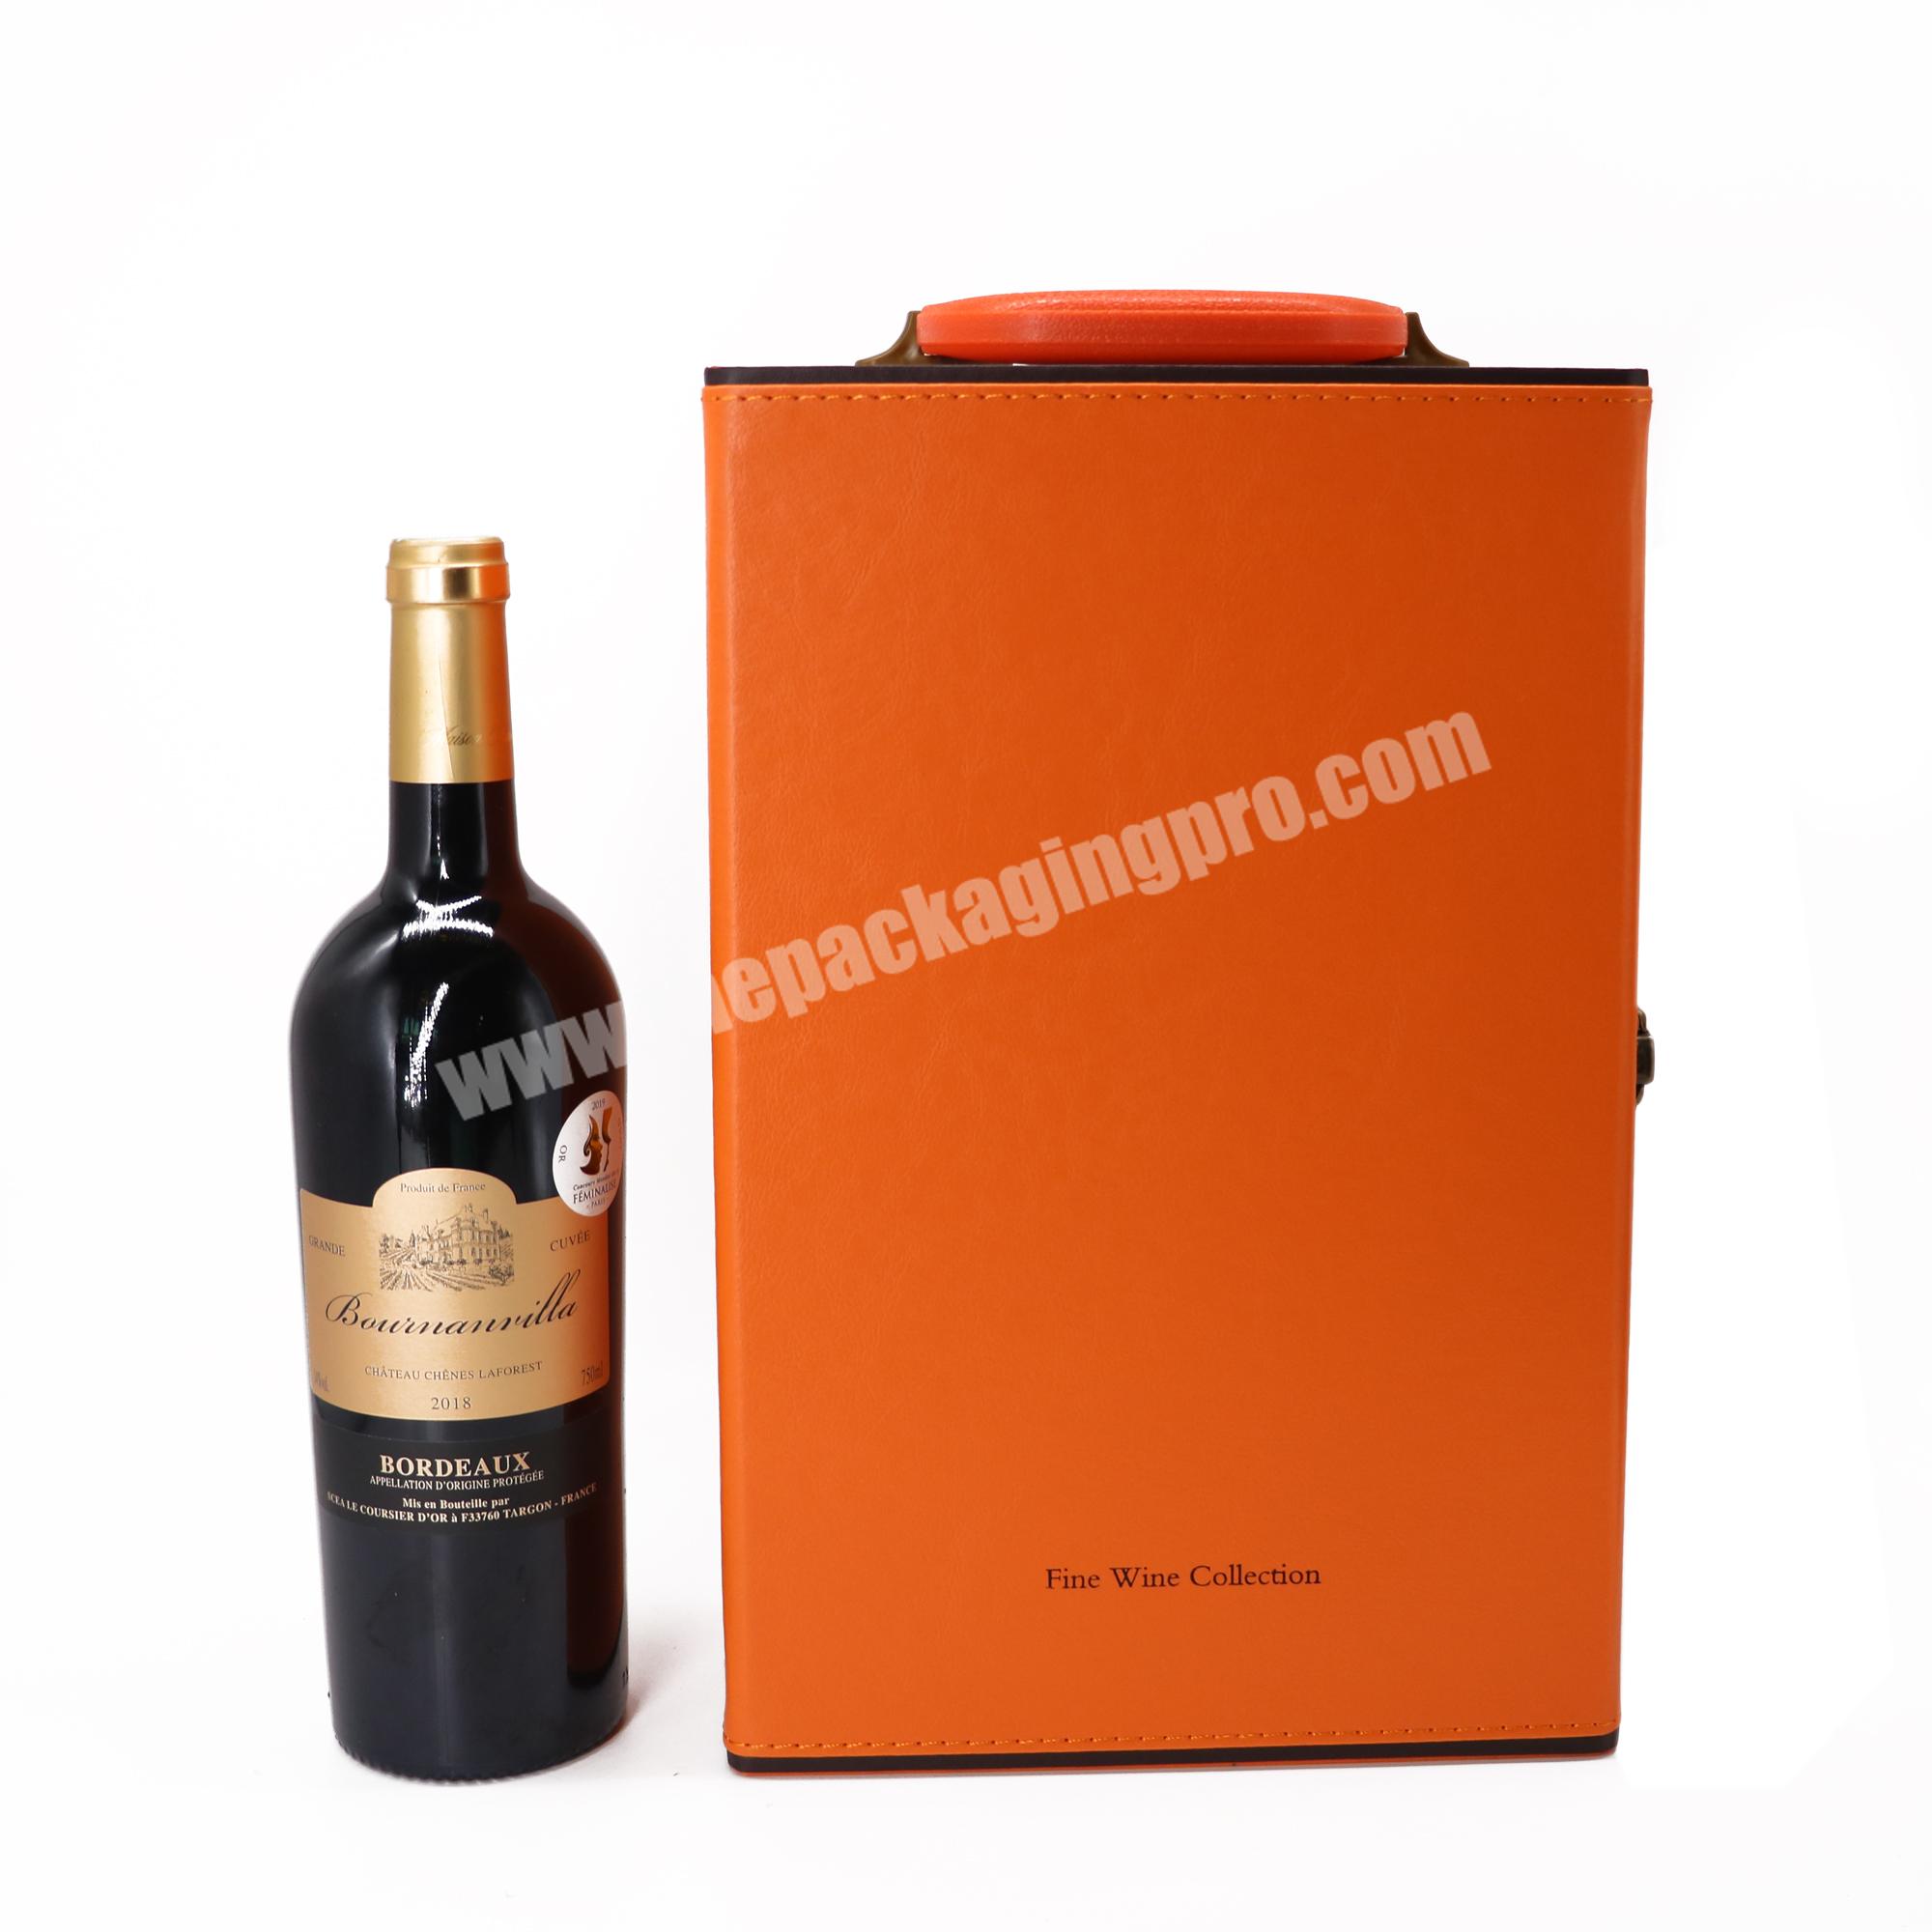 Rustic wood wine boxes with accessories wine wooden gift box luxury wine wood box